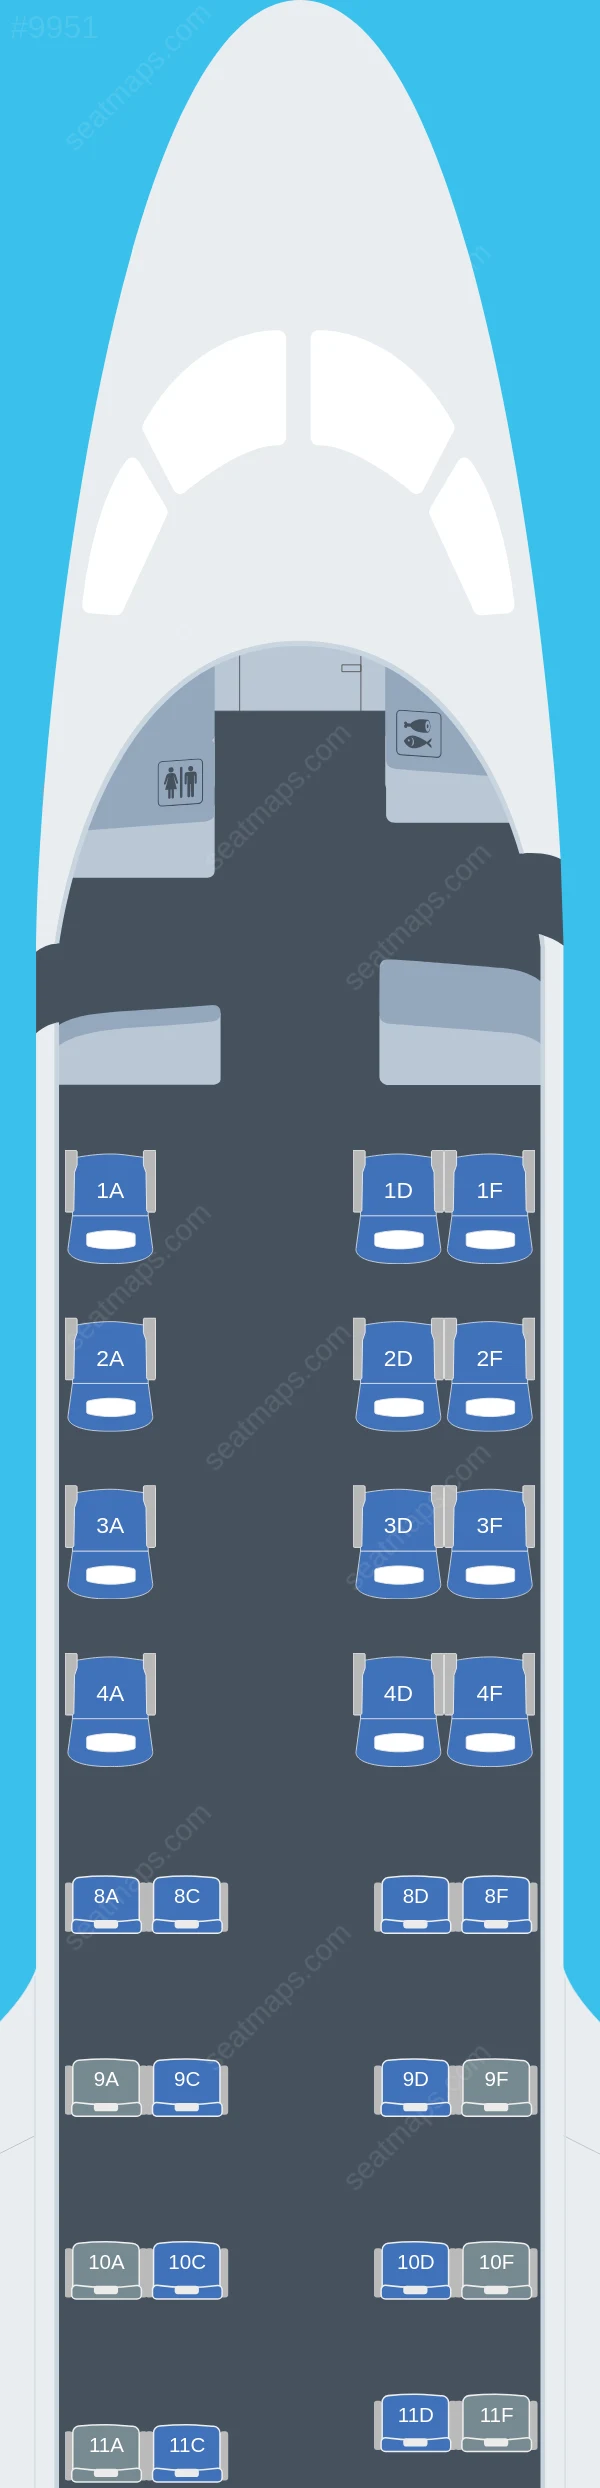 American Airlines Embraer E170 seatmap preview